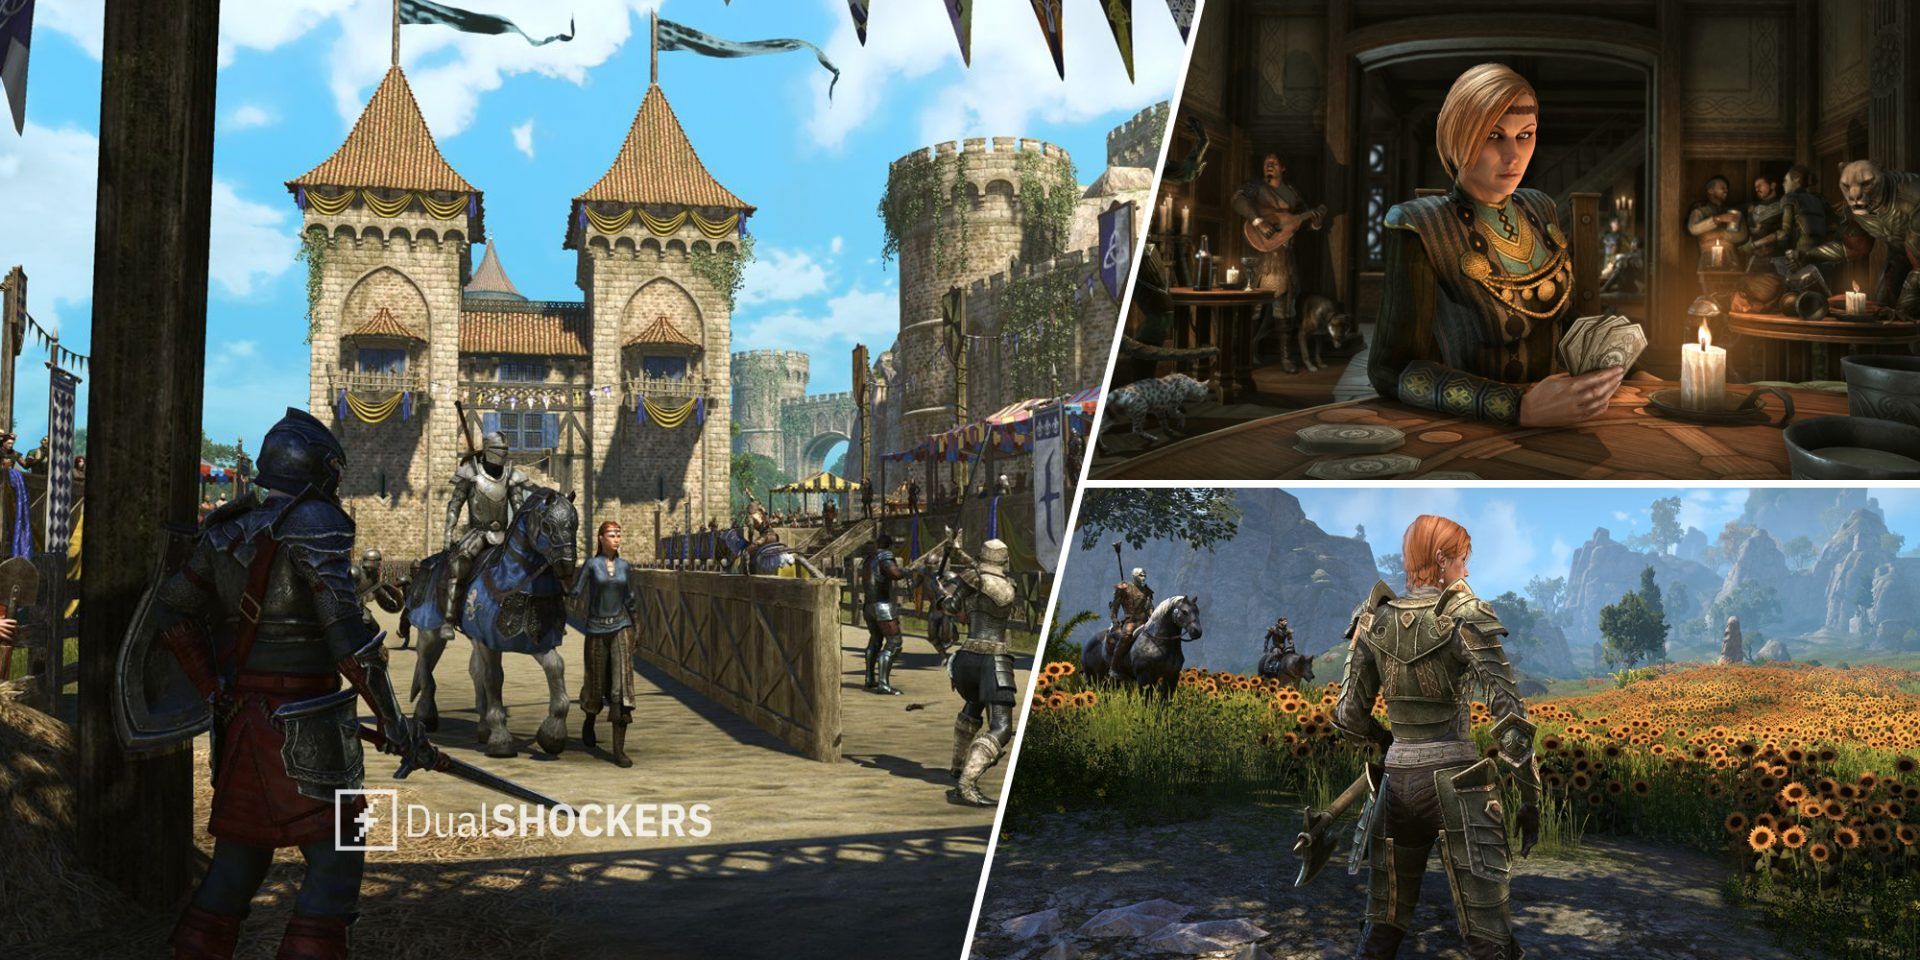 Elder Scrolls Online High Isle Legacy of the Bretons jousting tournament on left, character playing cards with player on top right, character looking at a field of sunflowers on bottom right